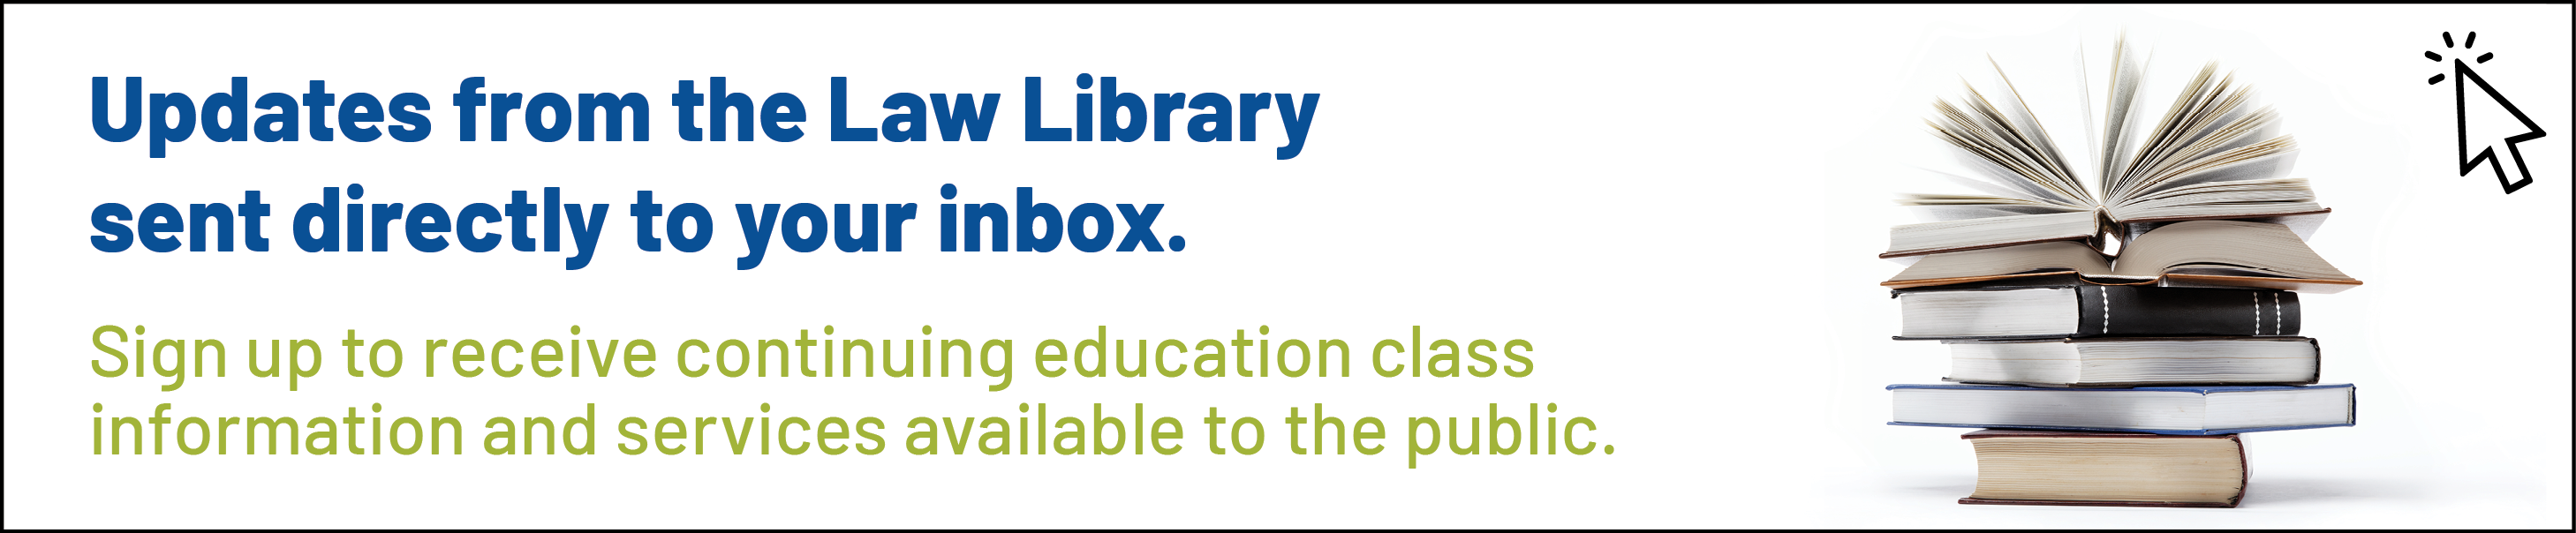 Click here to sign up to receive email notifications and information from the Law Library.